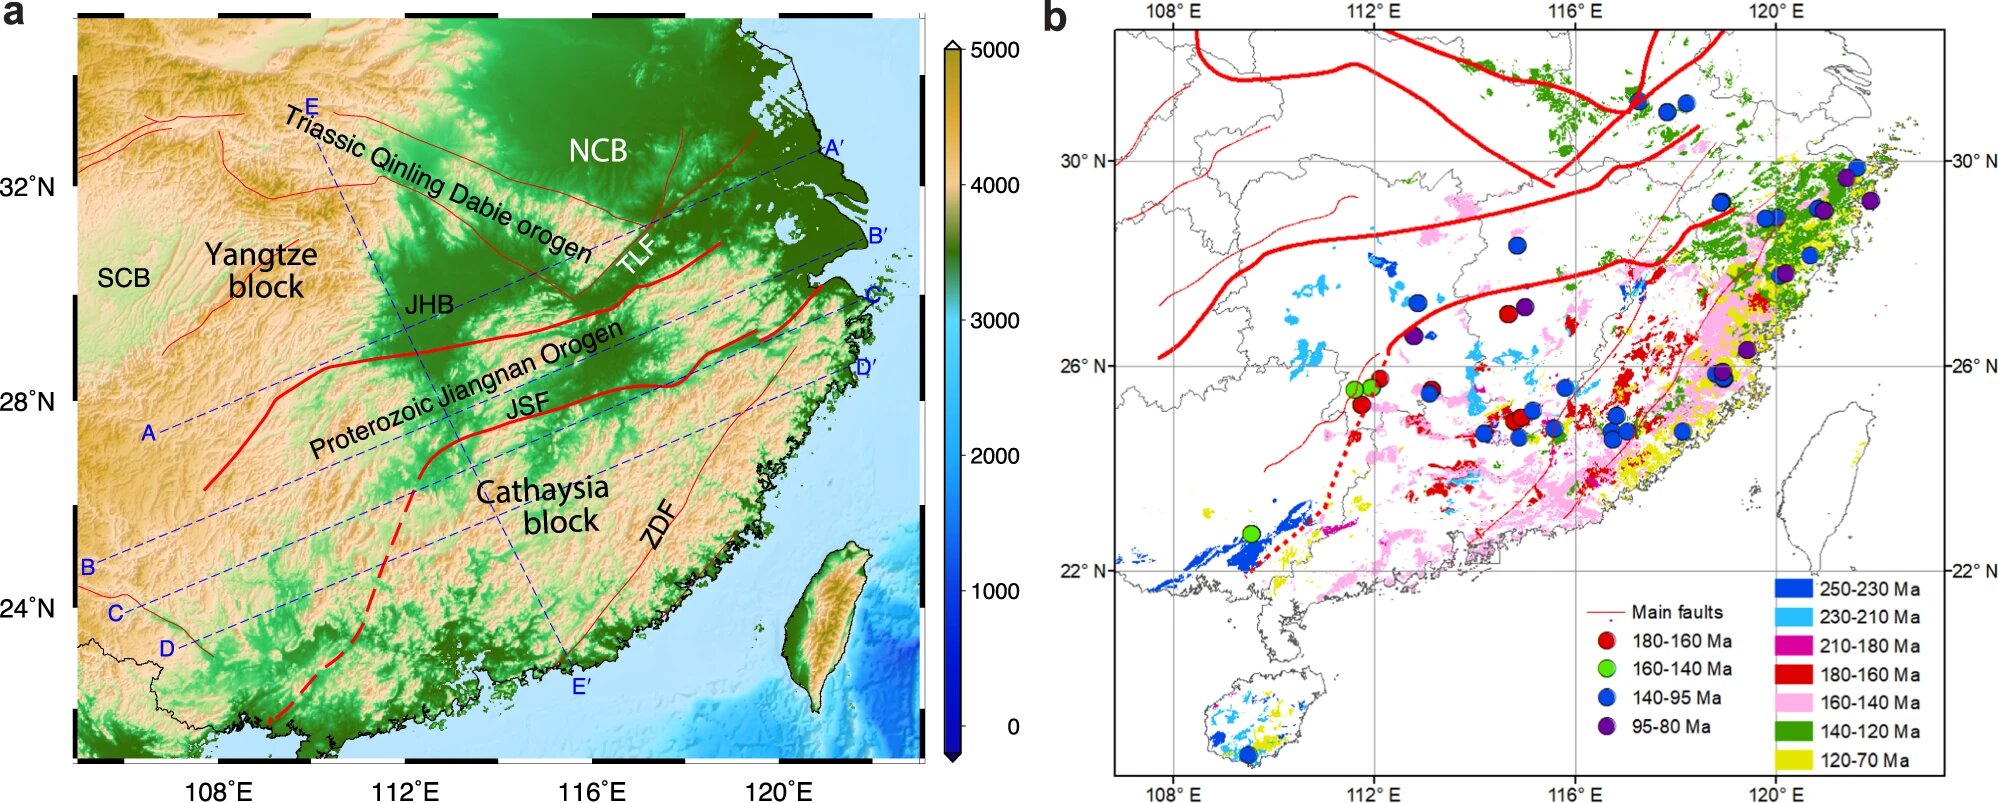 Seismic waves convey lithospheric delamination mechanism in South China - technology articles - Technology - Public News Time